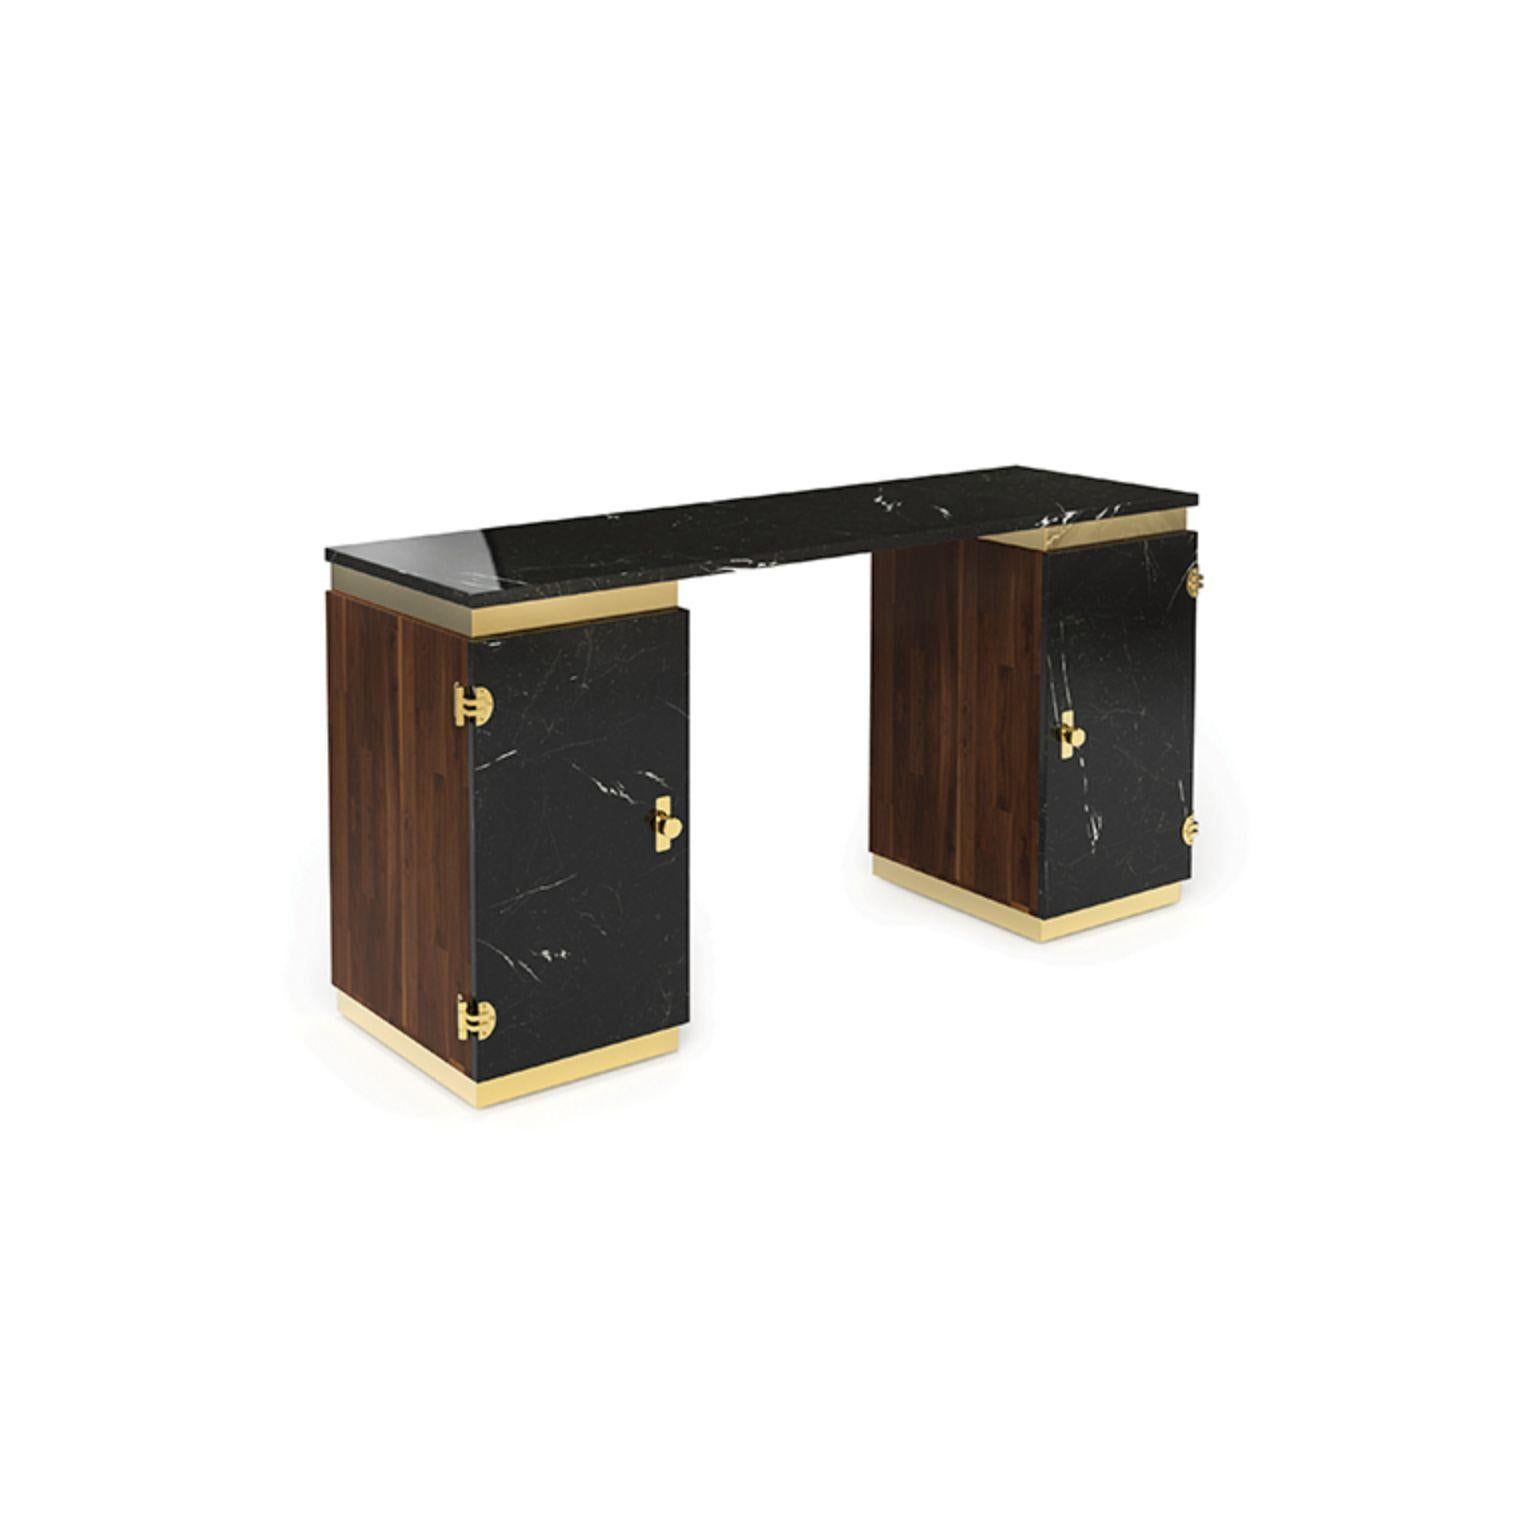 Lasdun is a writing desk inspired by the Brutalist works of Denys Lasdun. It features two cubic towers crafted from varnished walnut veneer with two doors made out of Nero Marquina marble, boasting a clean and monolithic presence. Brass details were